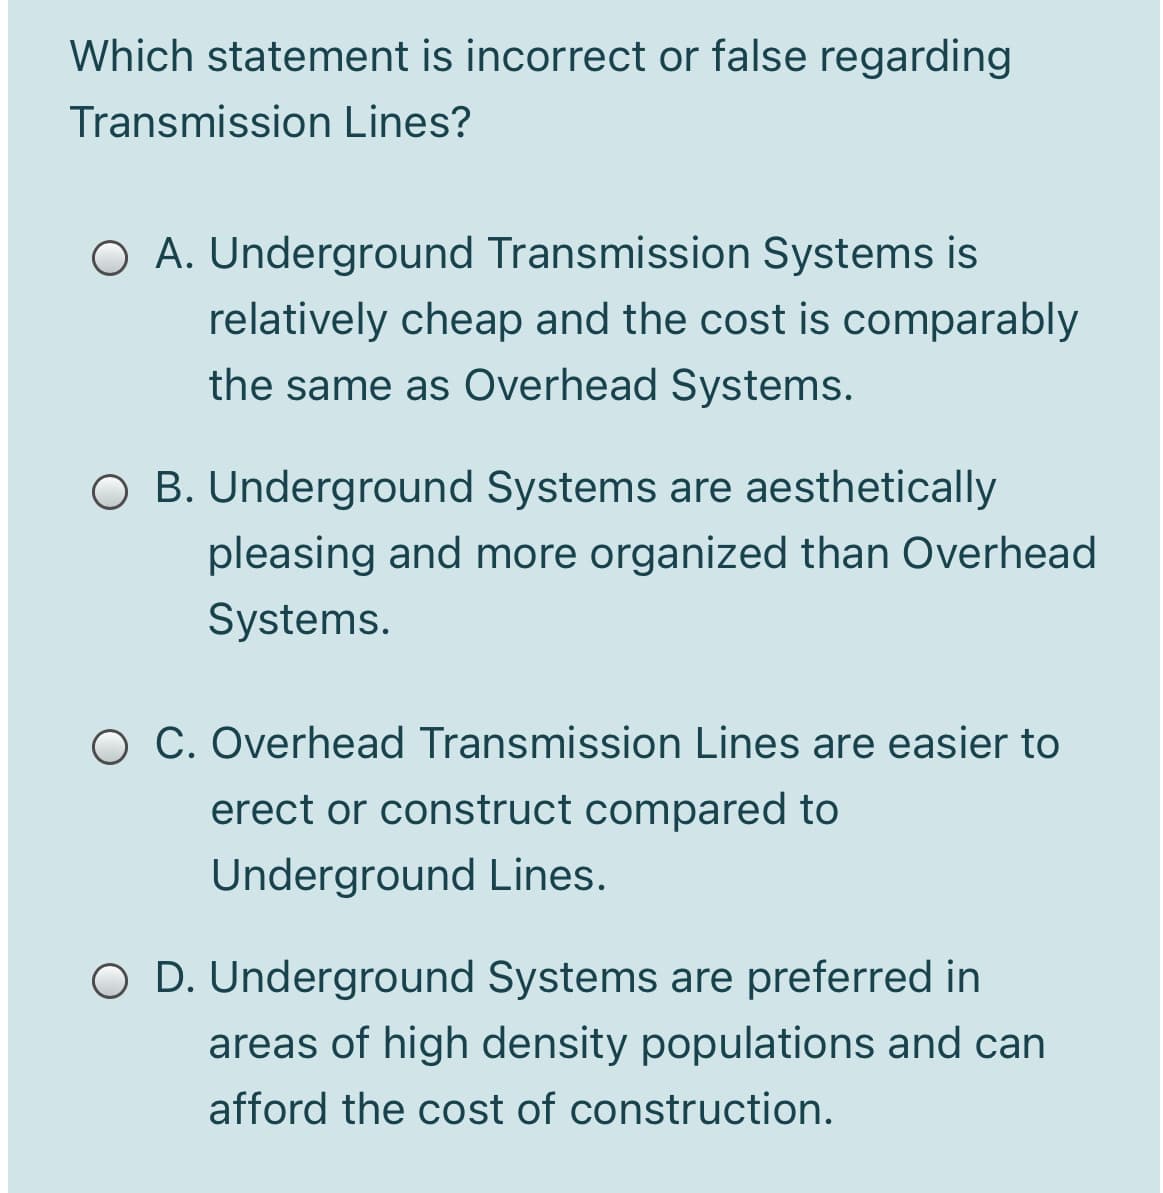 Which statement is incorrect or false regarding
Transmission Lines?
O A. Underground Transmission Systems is
relatively cheap and the cost is comparably
the same as Overhead Systems.
O B. Underground Systems are aesthetically
pleasing and more organized than Overhead
Systems.
O C. Overhead Transmission Lines are easier to
erect or construct compared to
Underground Lines.
O D. Underground Systems are preferred in
areas of high density populations and can
afford the cost of construction.
